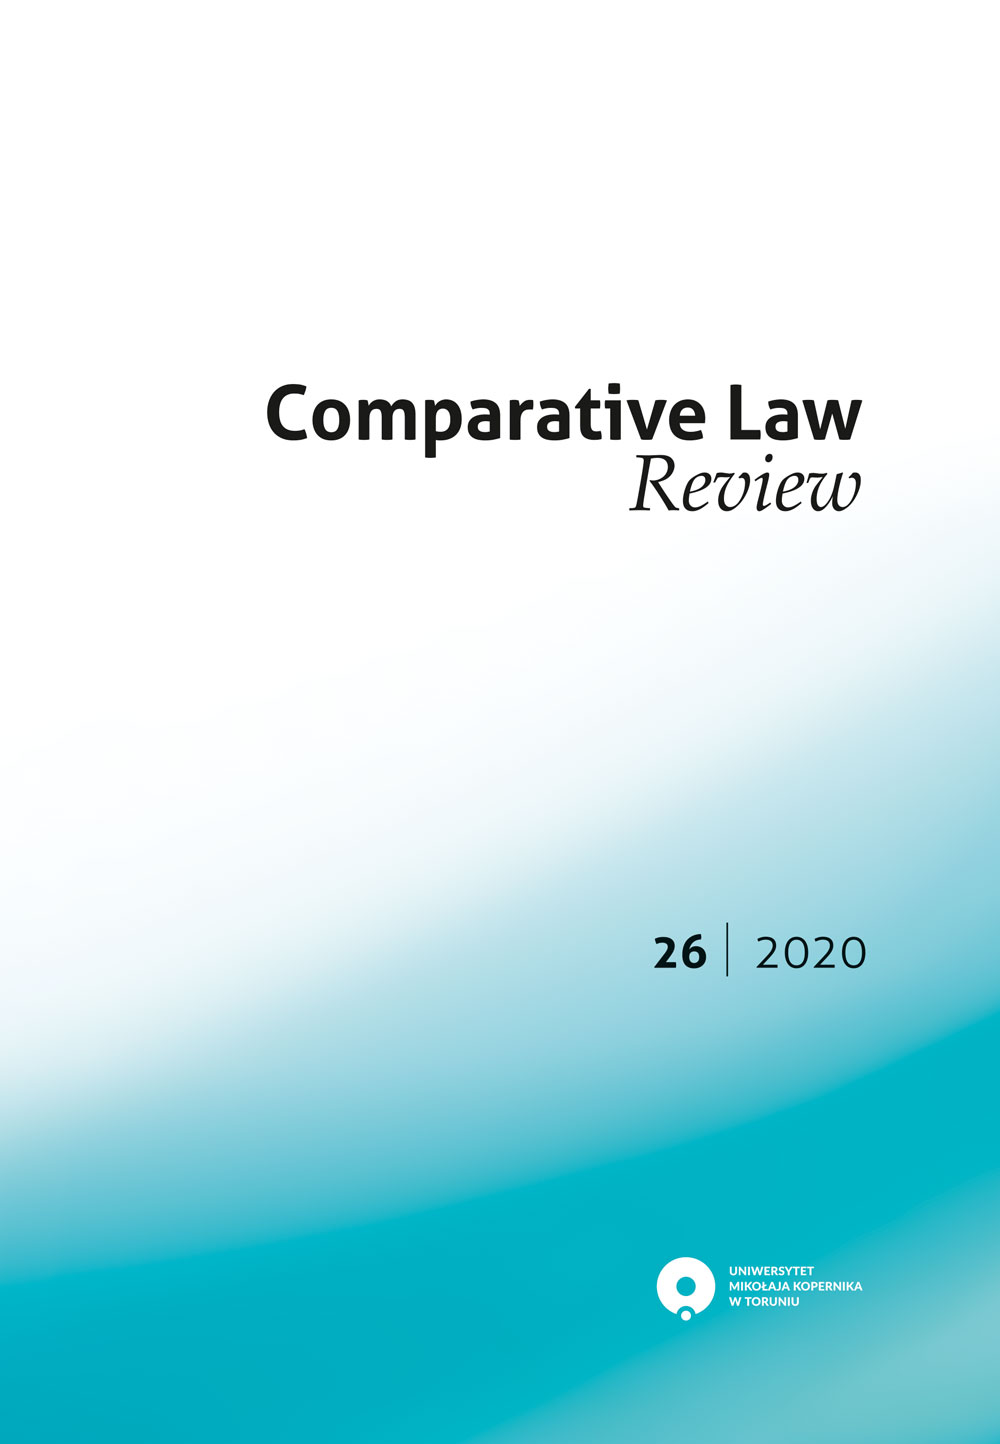 Criminal Law in Federal States: a Lesson for the EU Cover Image